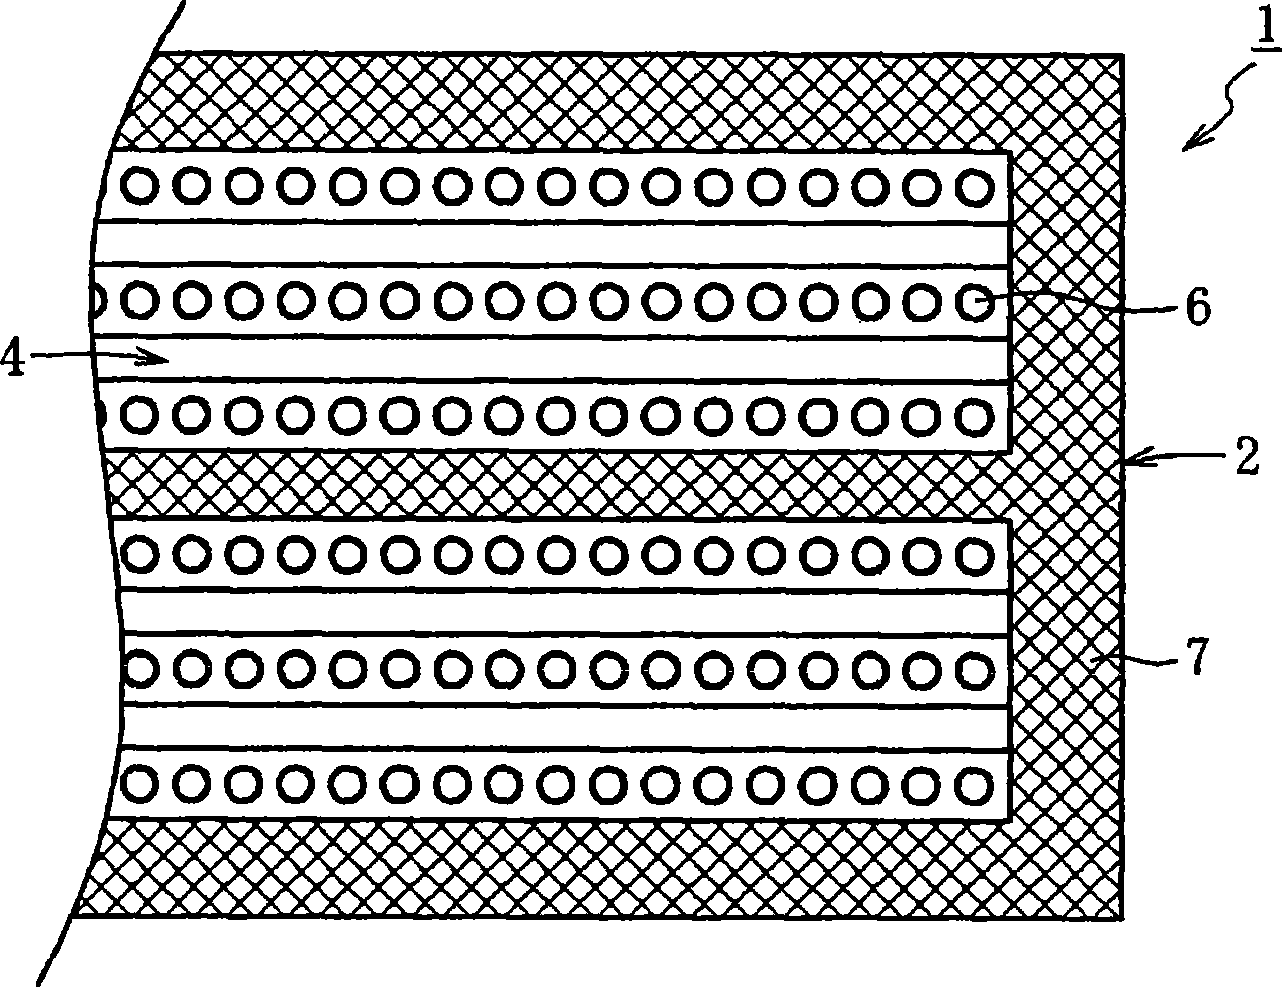 Bushing for production of glass continuous filament, equipment for producing glass continuous filament and process for production of the filament using the equipment